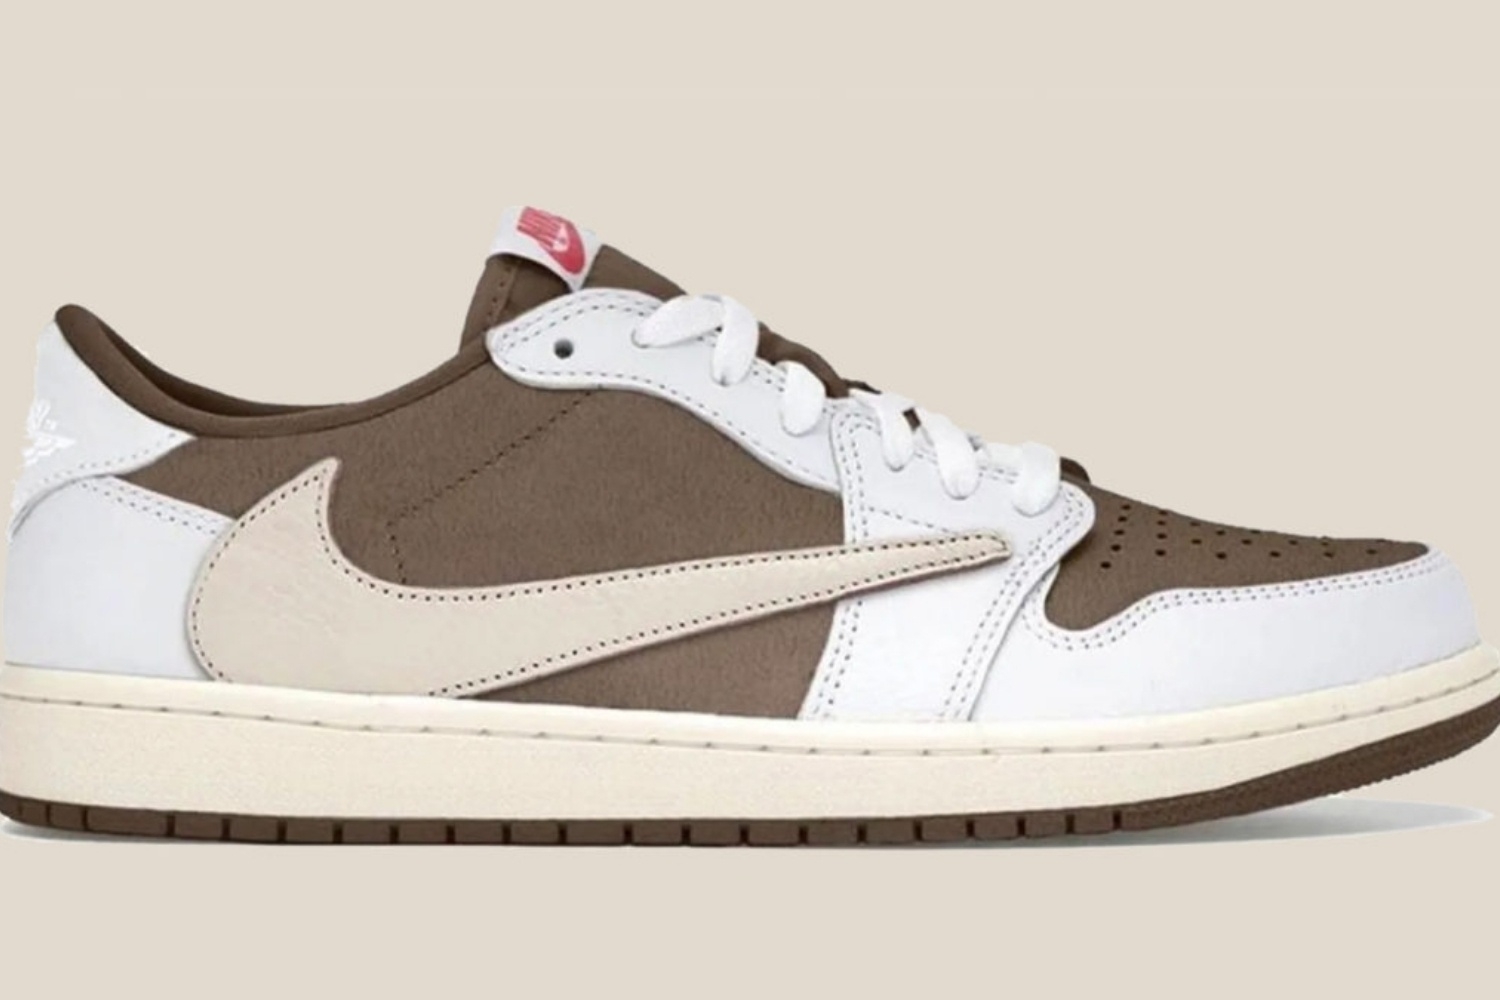 A new Travis Scott x Air Jordan 1 Low is coming our way